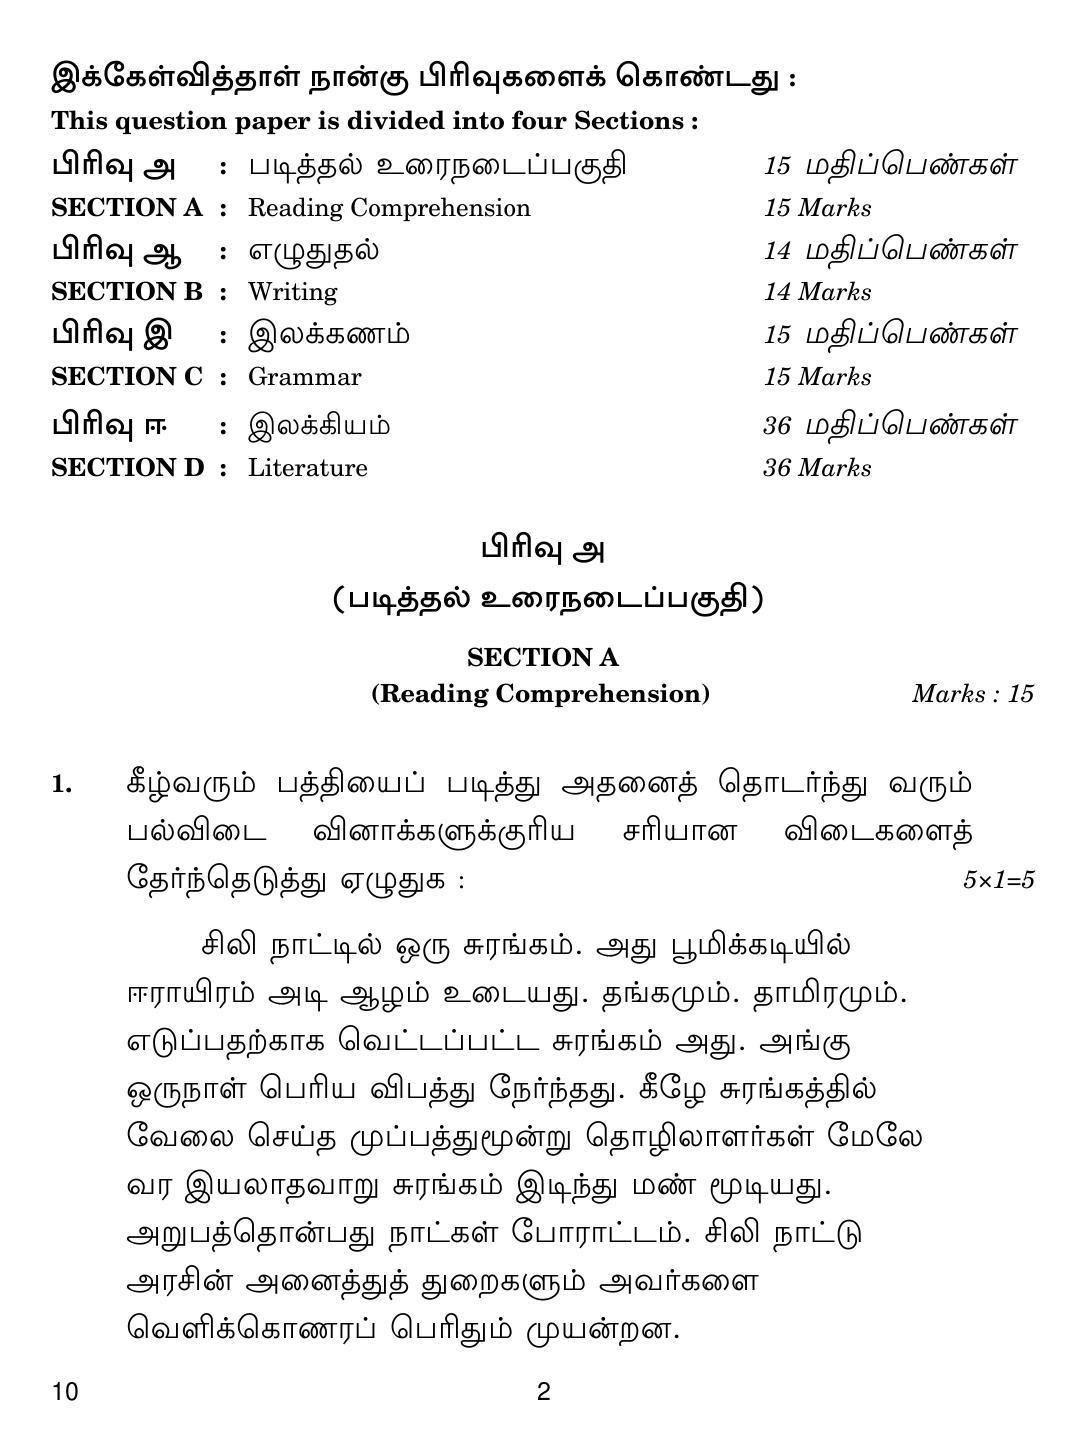 CBSE Class 10 10 Tamil 2019 Question Paper - Page 2